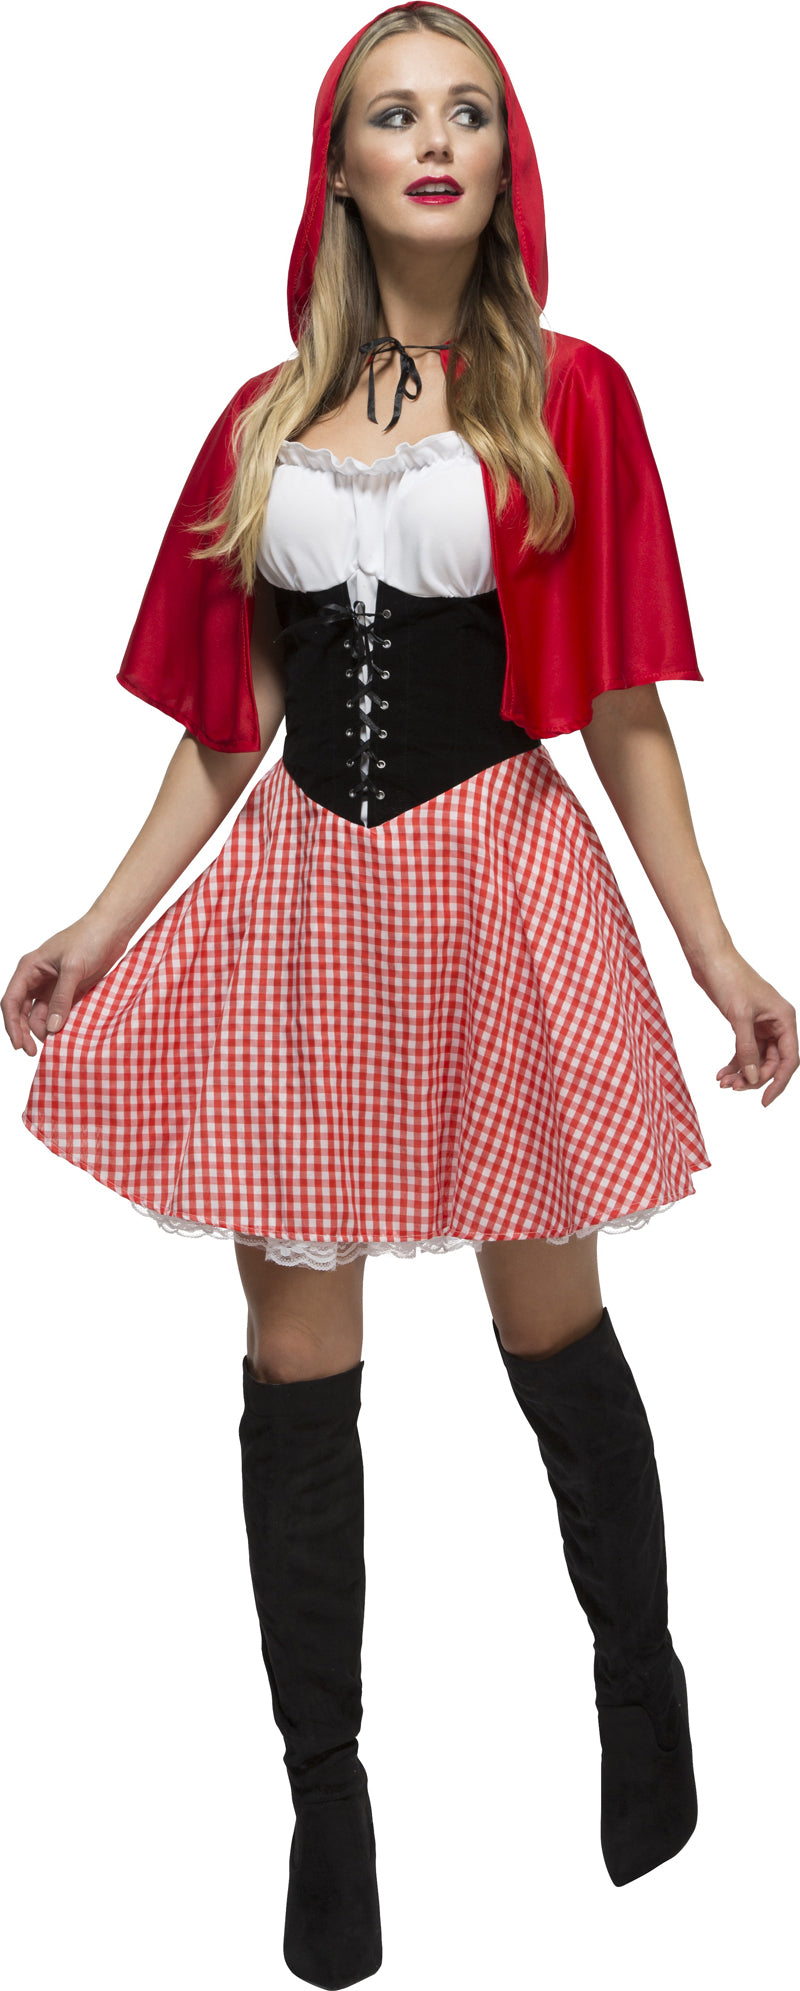 Fairytale Fever Red Riding Hood Ladies Costume